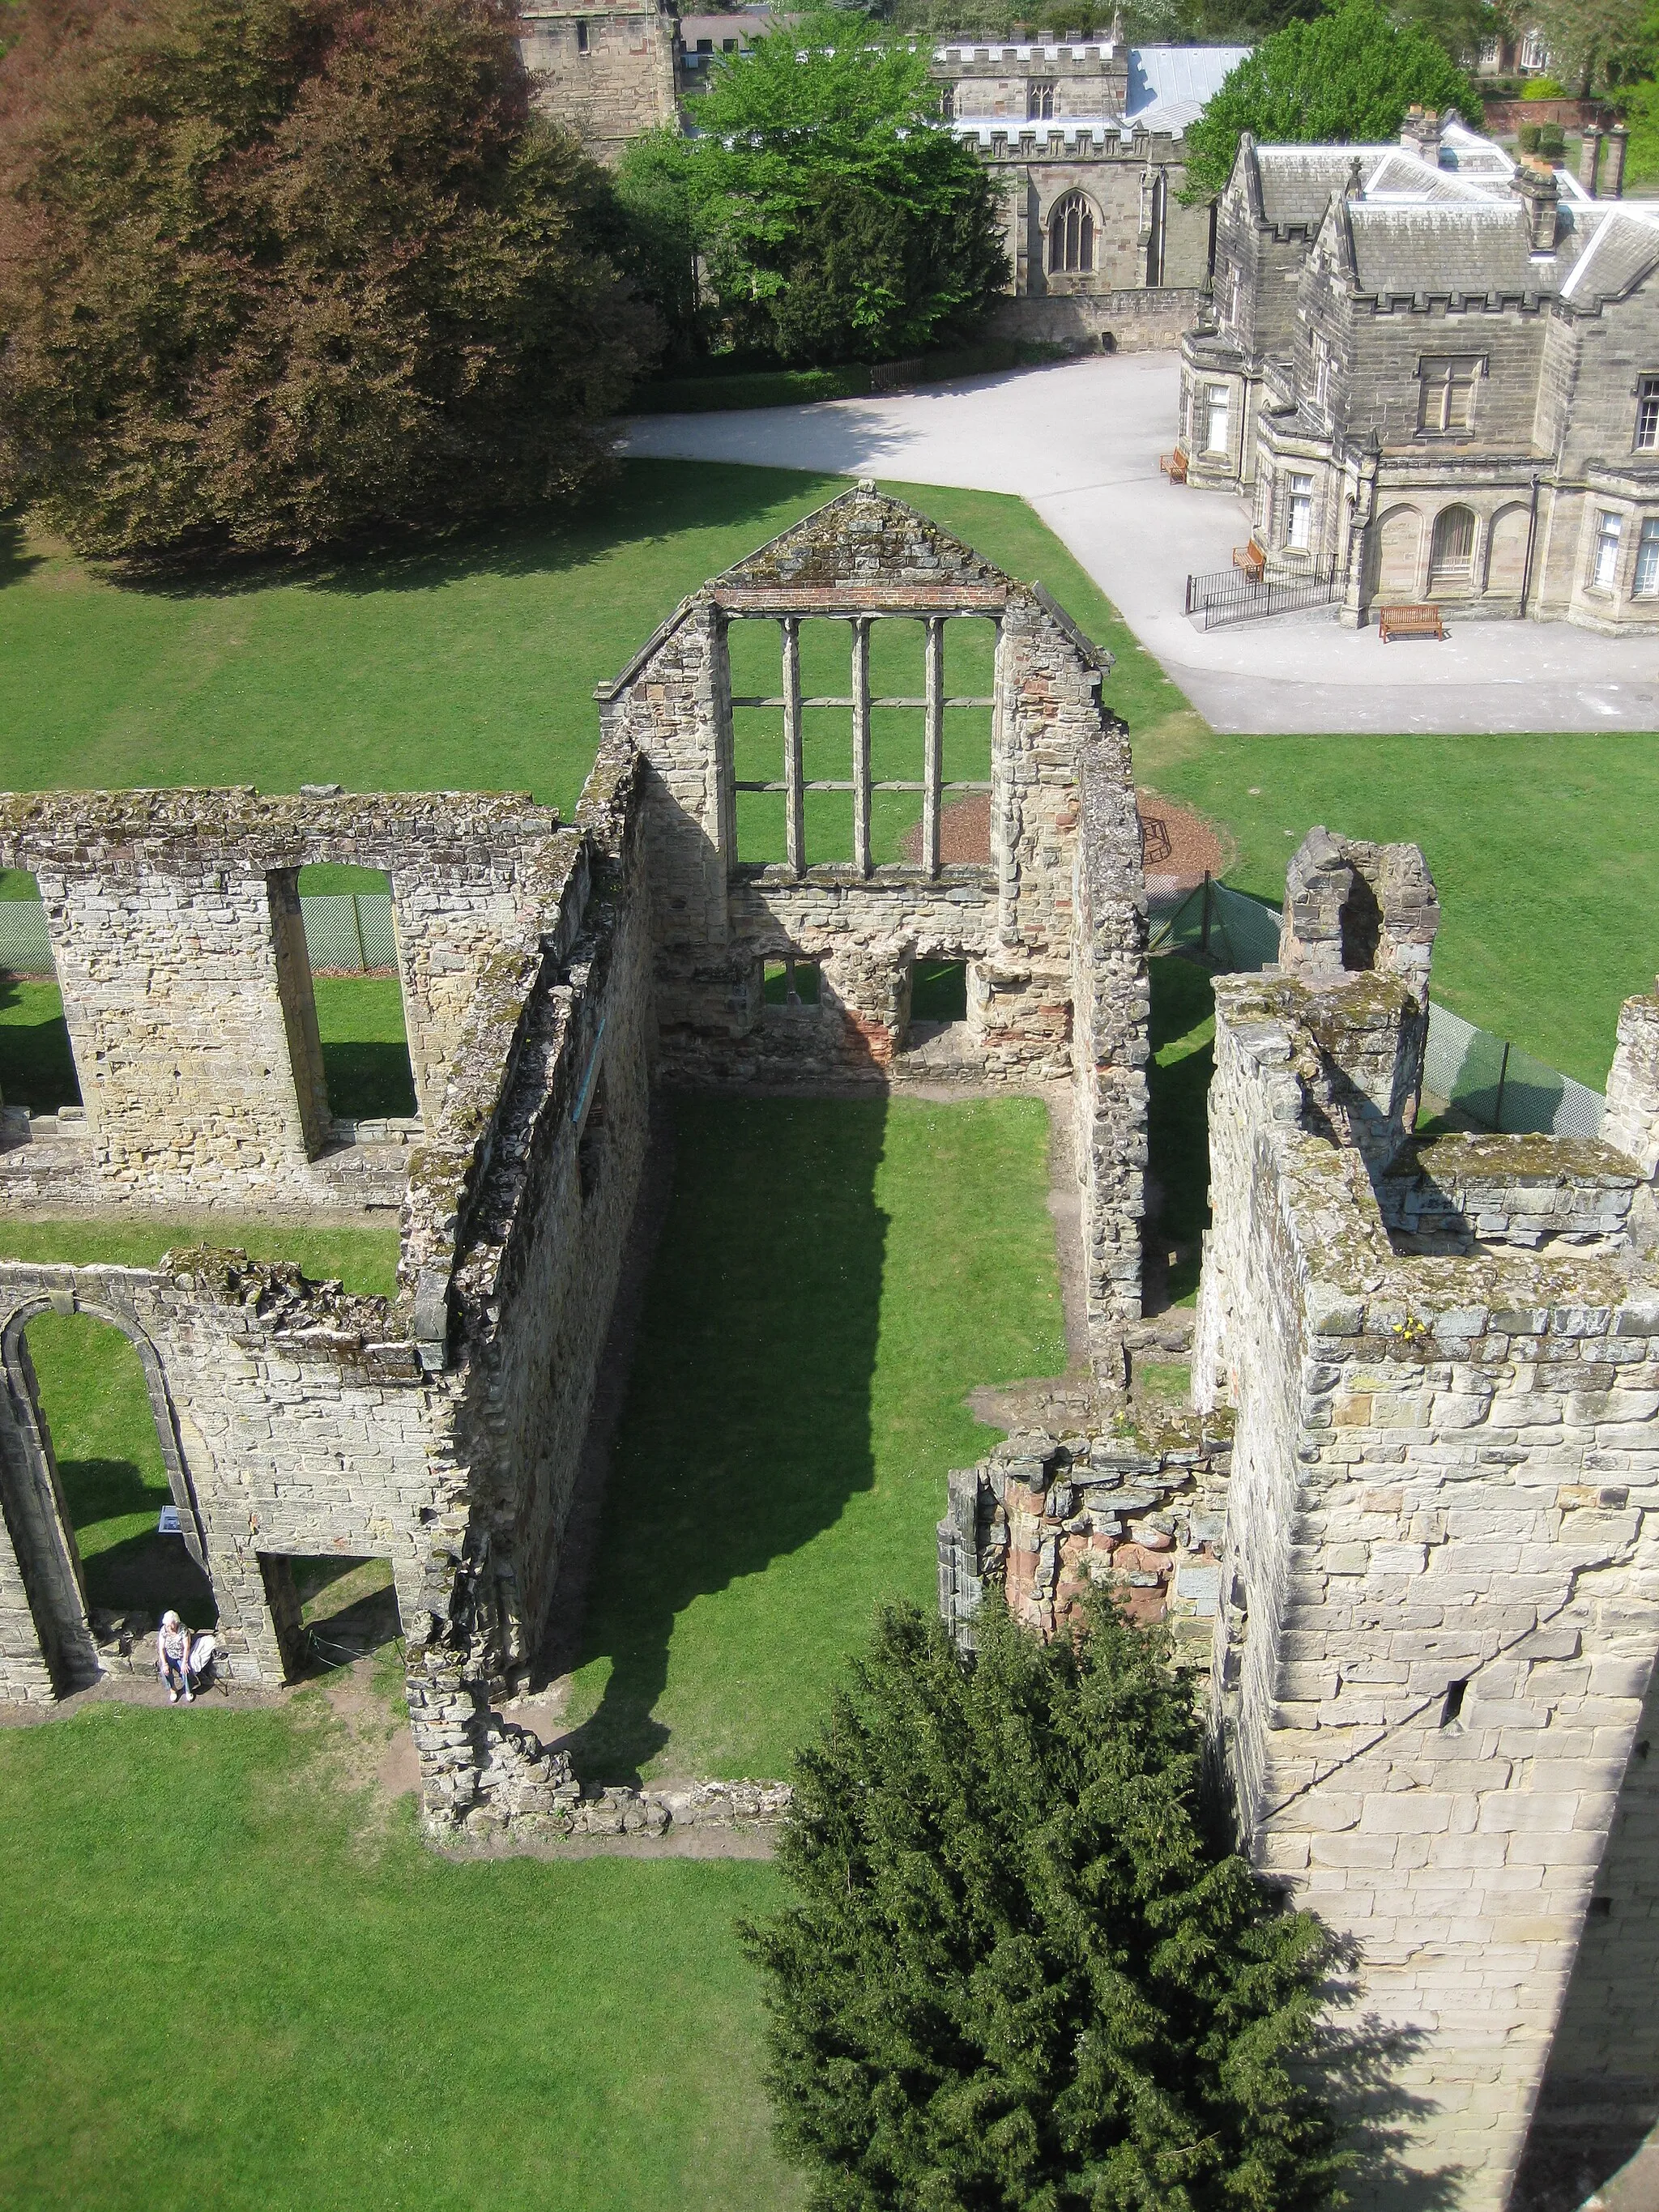 Photo showing: the main hall at Ashby de la Zouch castle as seen from the main tower